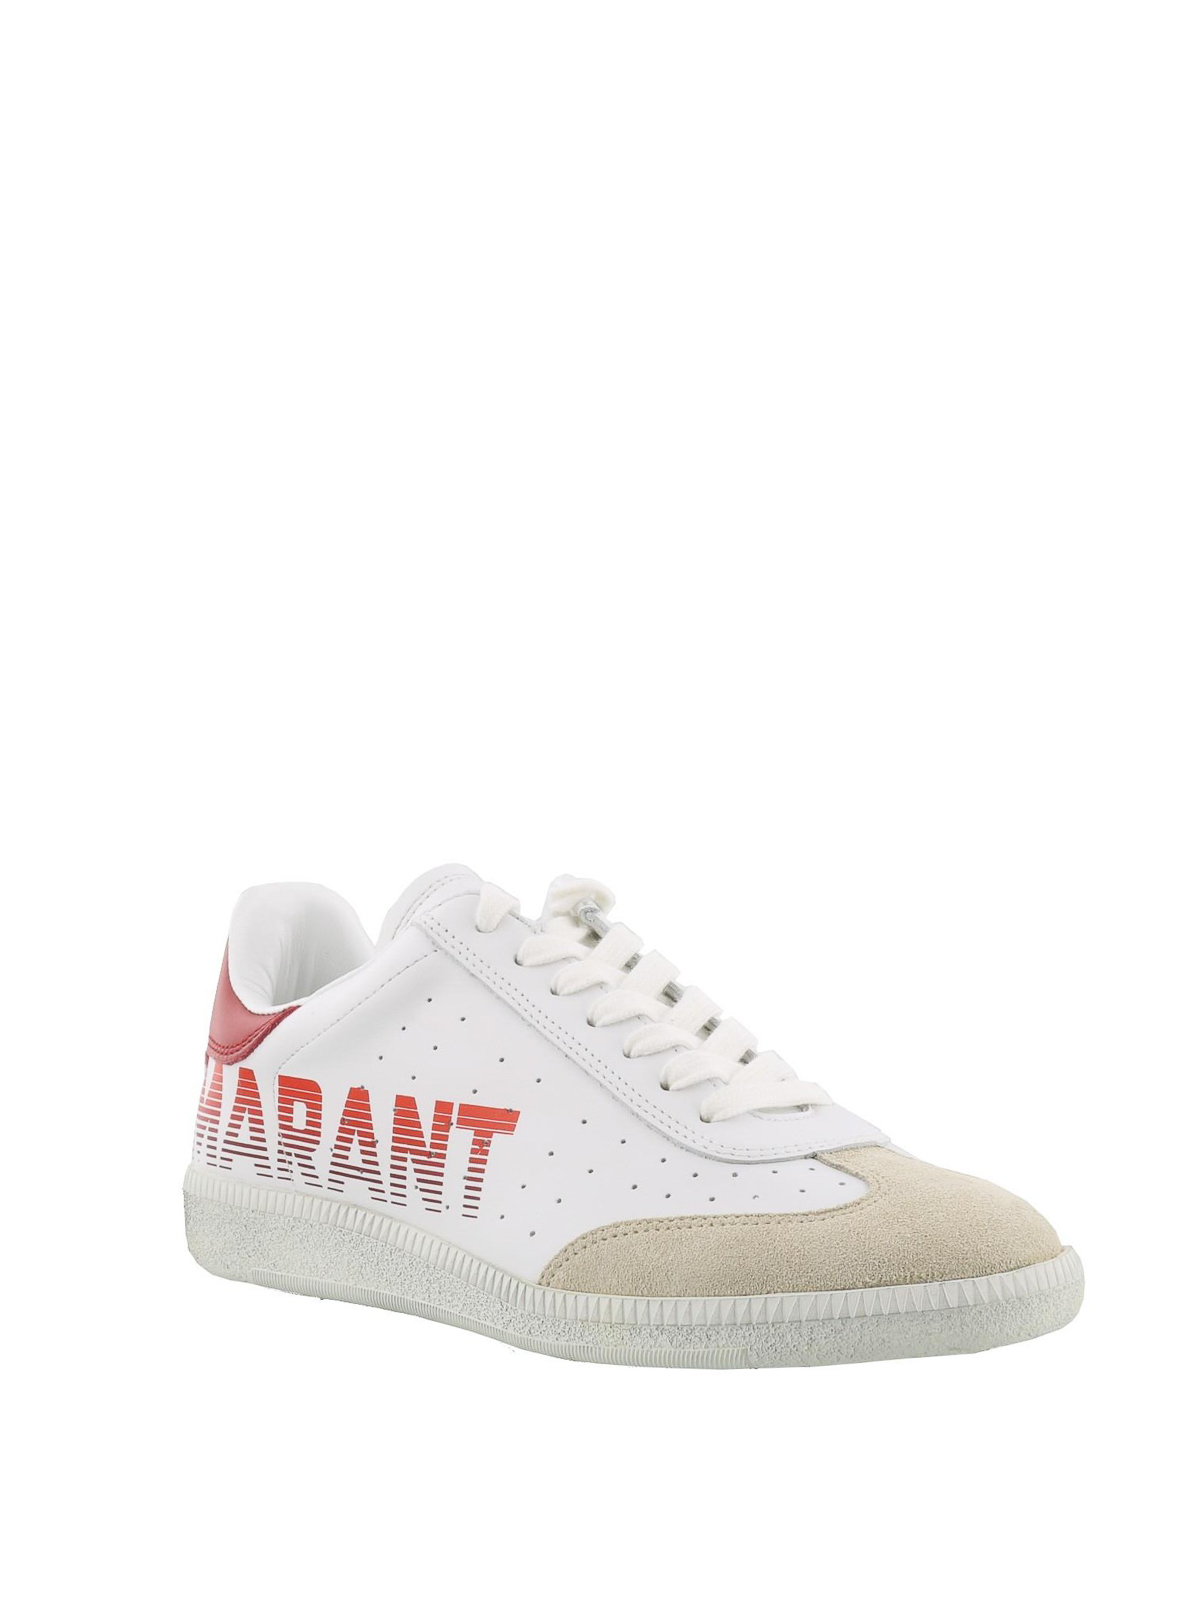 isabel marant bryce trainers